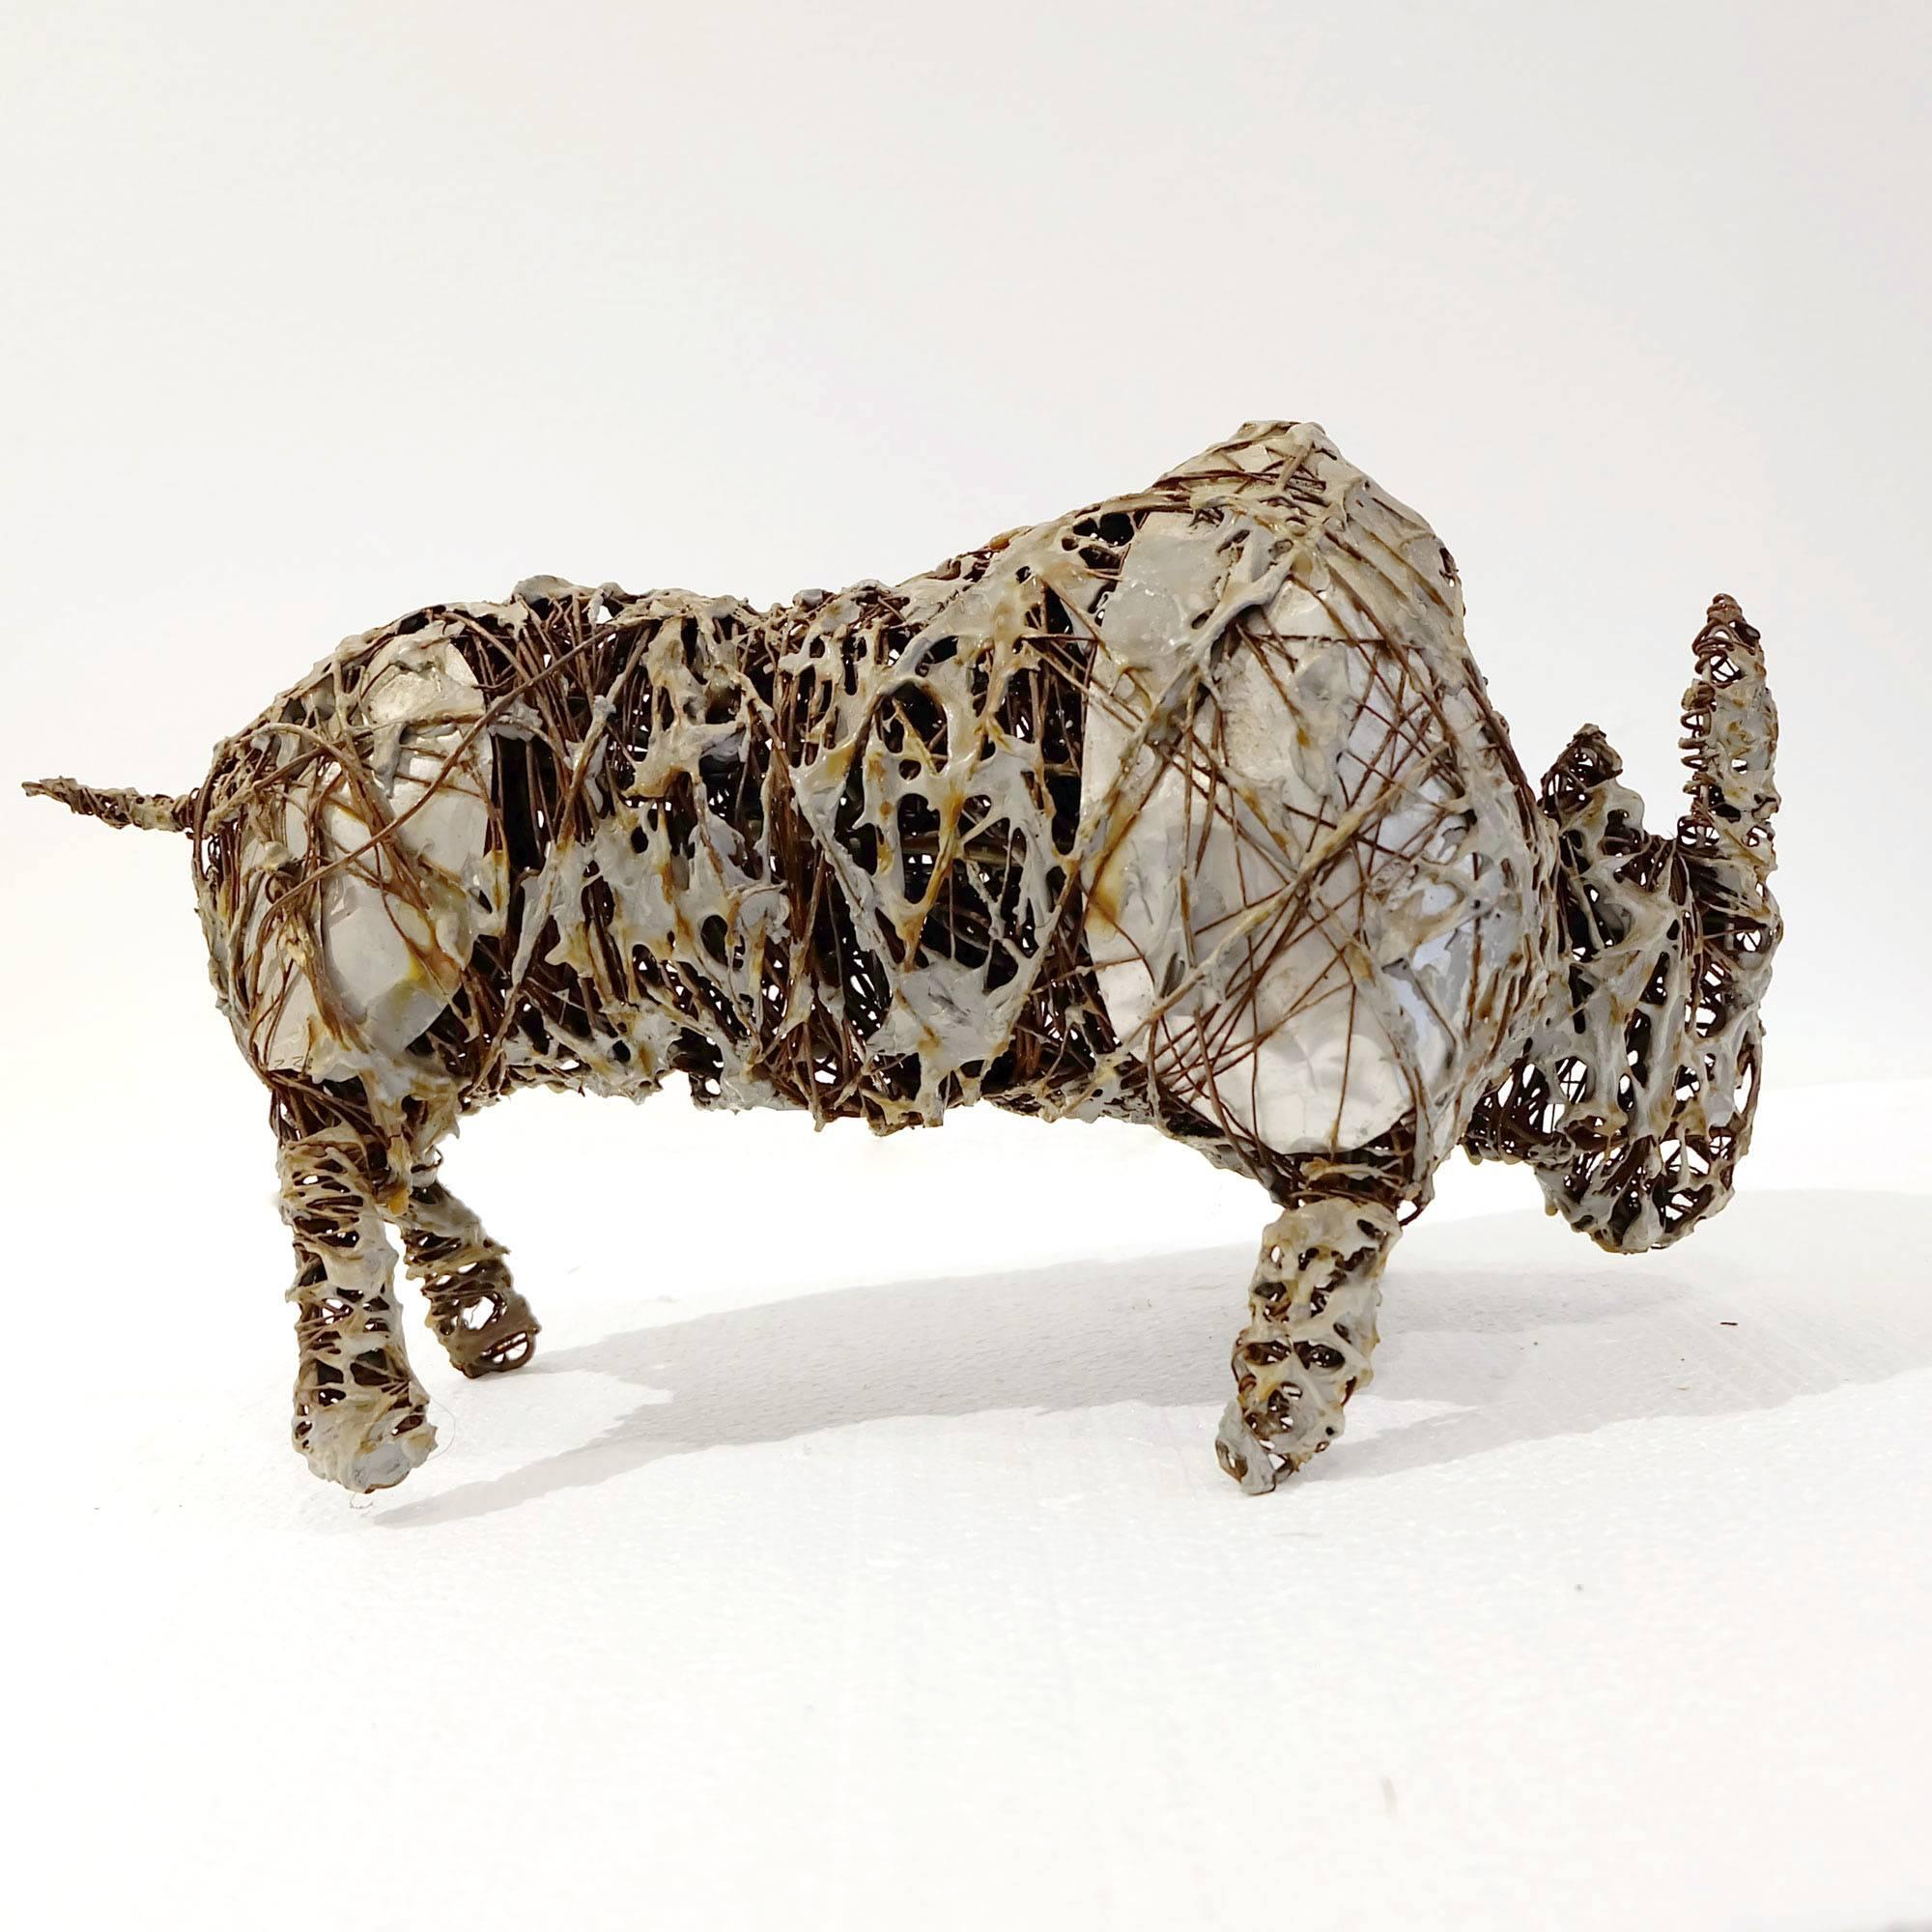 Hand wire with fused aluminum Rhino Figure